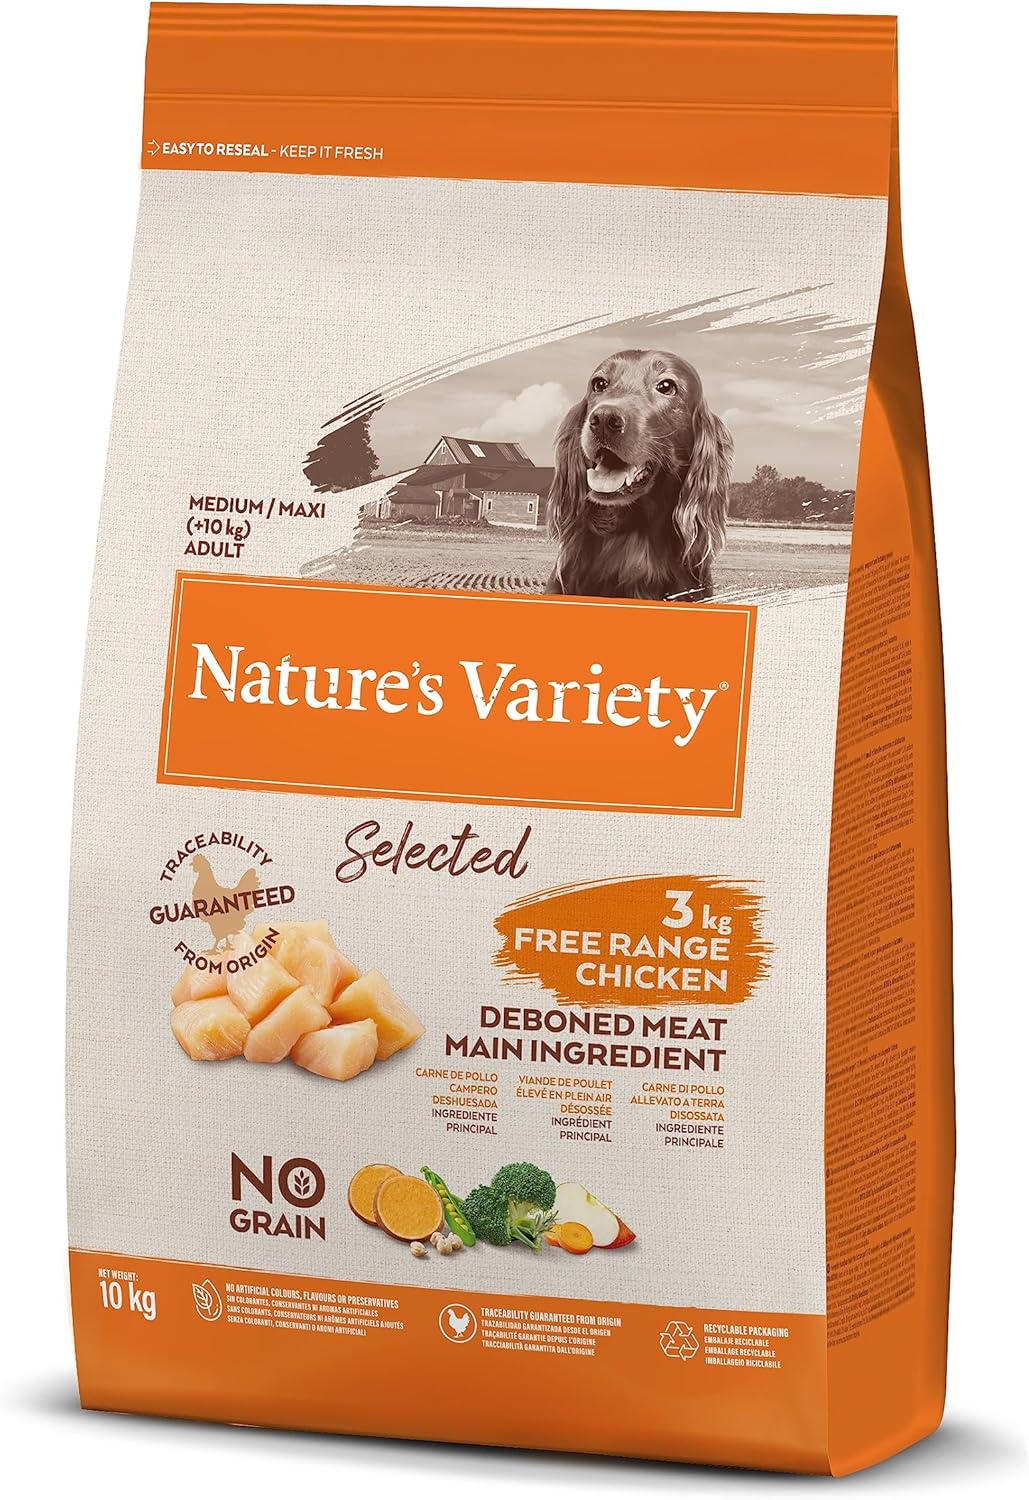 Nature's Variety Selected Complete Dry Food for Medium & Maxi Dogs with Free Range Chicken - 10 Kg?927143